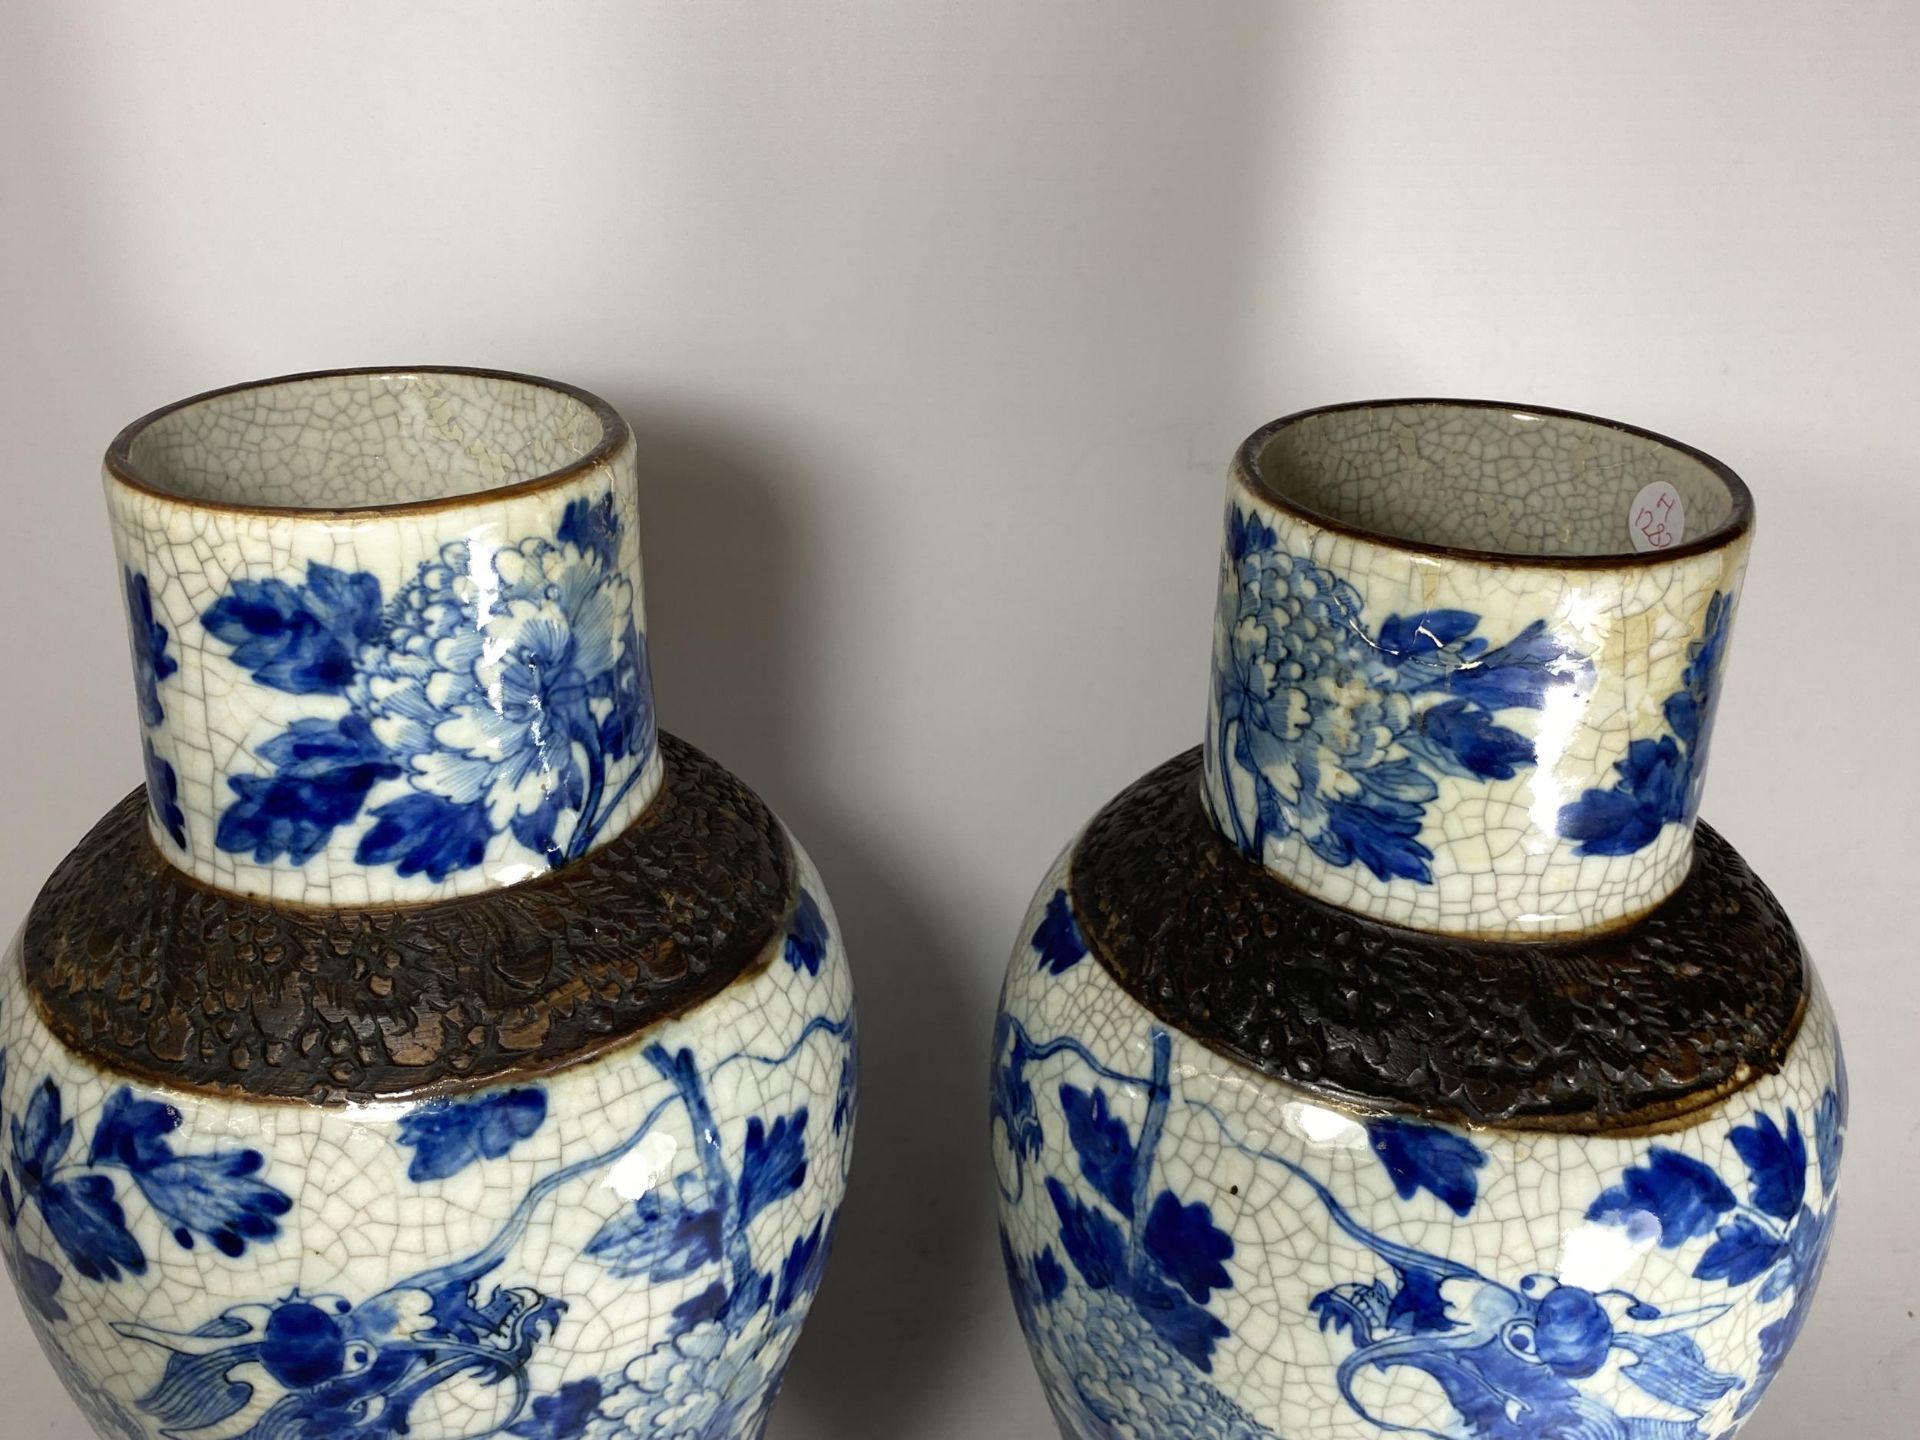 A PAIR OF EARLY 20TH CENTURY CHINESE BLUE AND WHITE CRACKLE GLAZE DRAGON DESIGN VASES, A/F, HEIGHT - Image 4 of 13